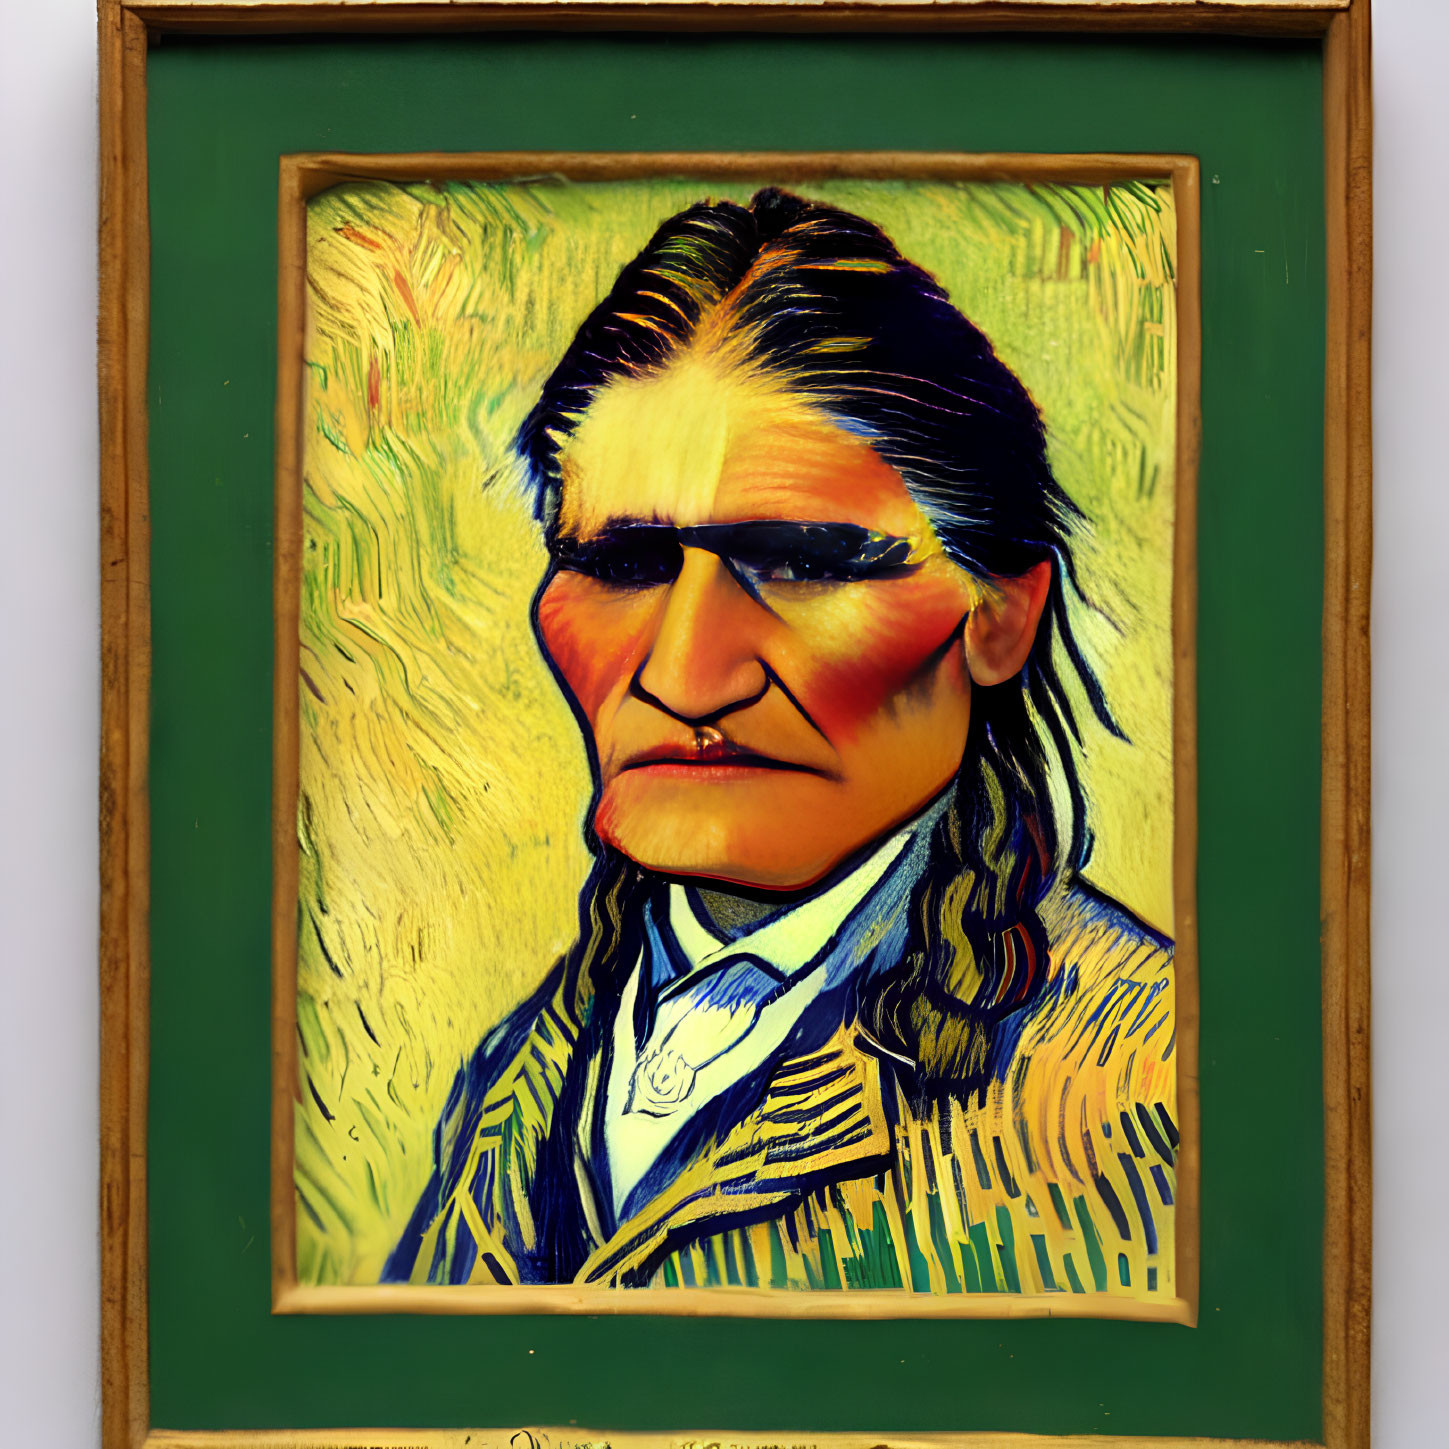 Stylized Native American man portrait in green frame with Van Gogh background